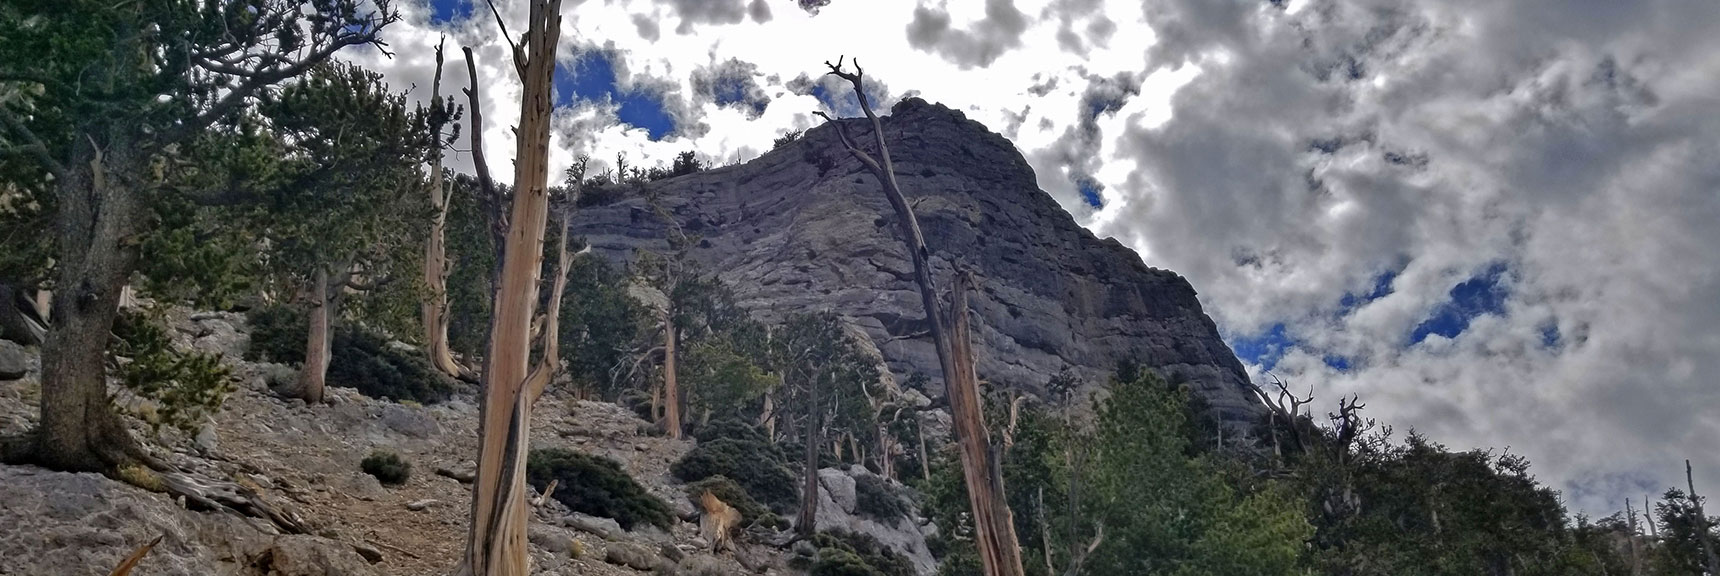 Heading Up the Final Southern Approach Slope with Beautiful Bristlecone Pine Forest. | The Sisters South | Lee Canyon | Mt Charleston Wilderness | Spring Mountains, Nevada